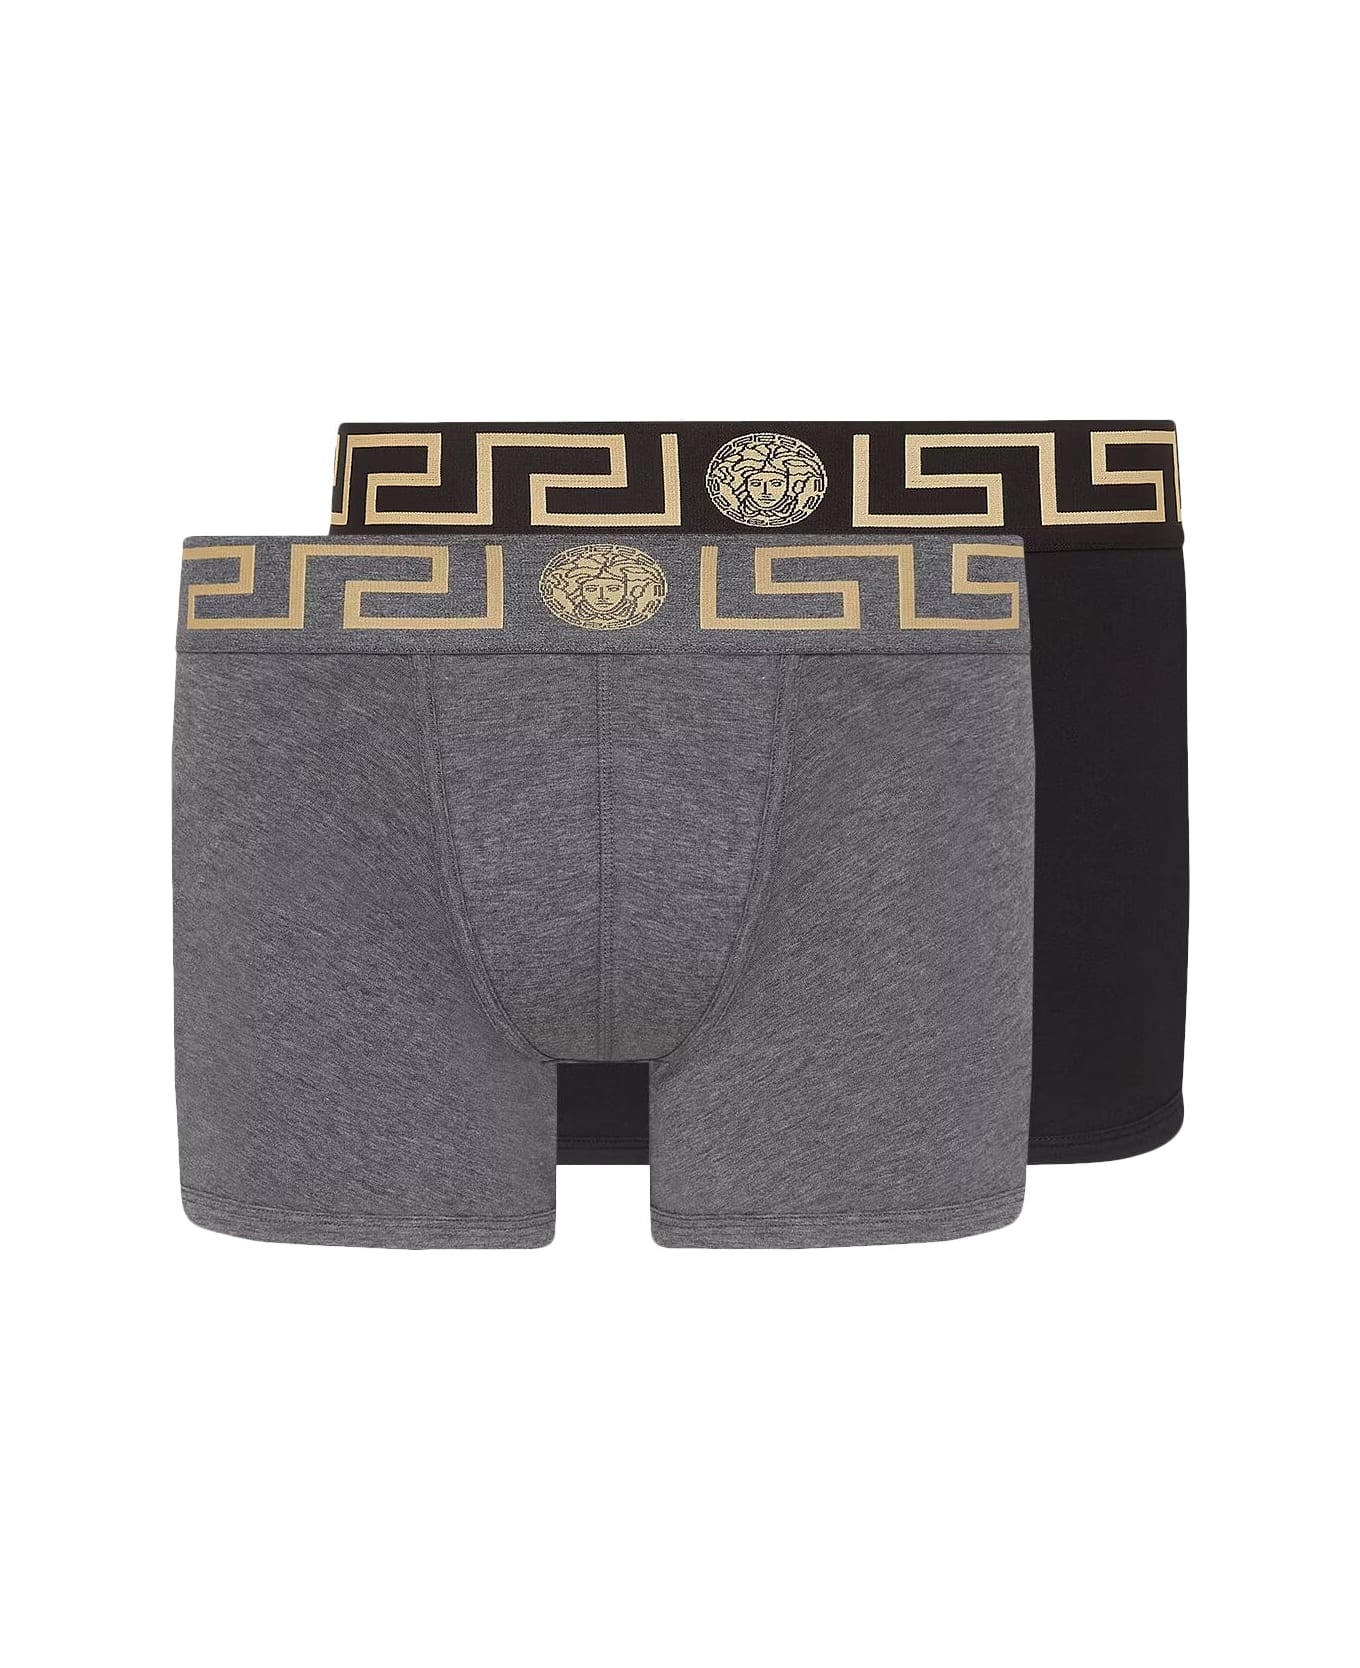 Versace Pack Of Two Boxer Shorts With Greek Motif - BK/GR ショーツ